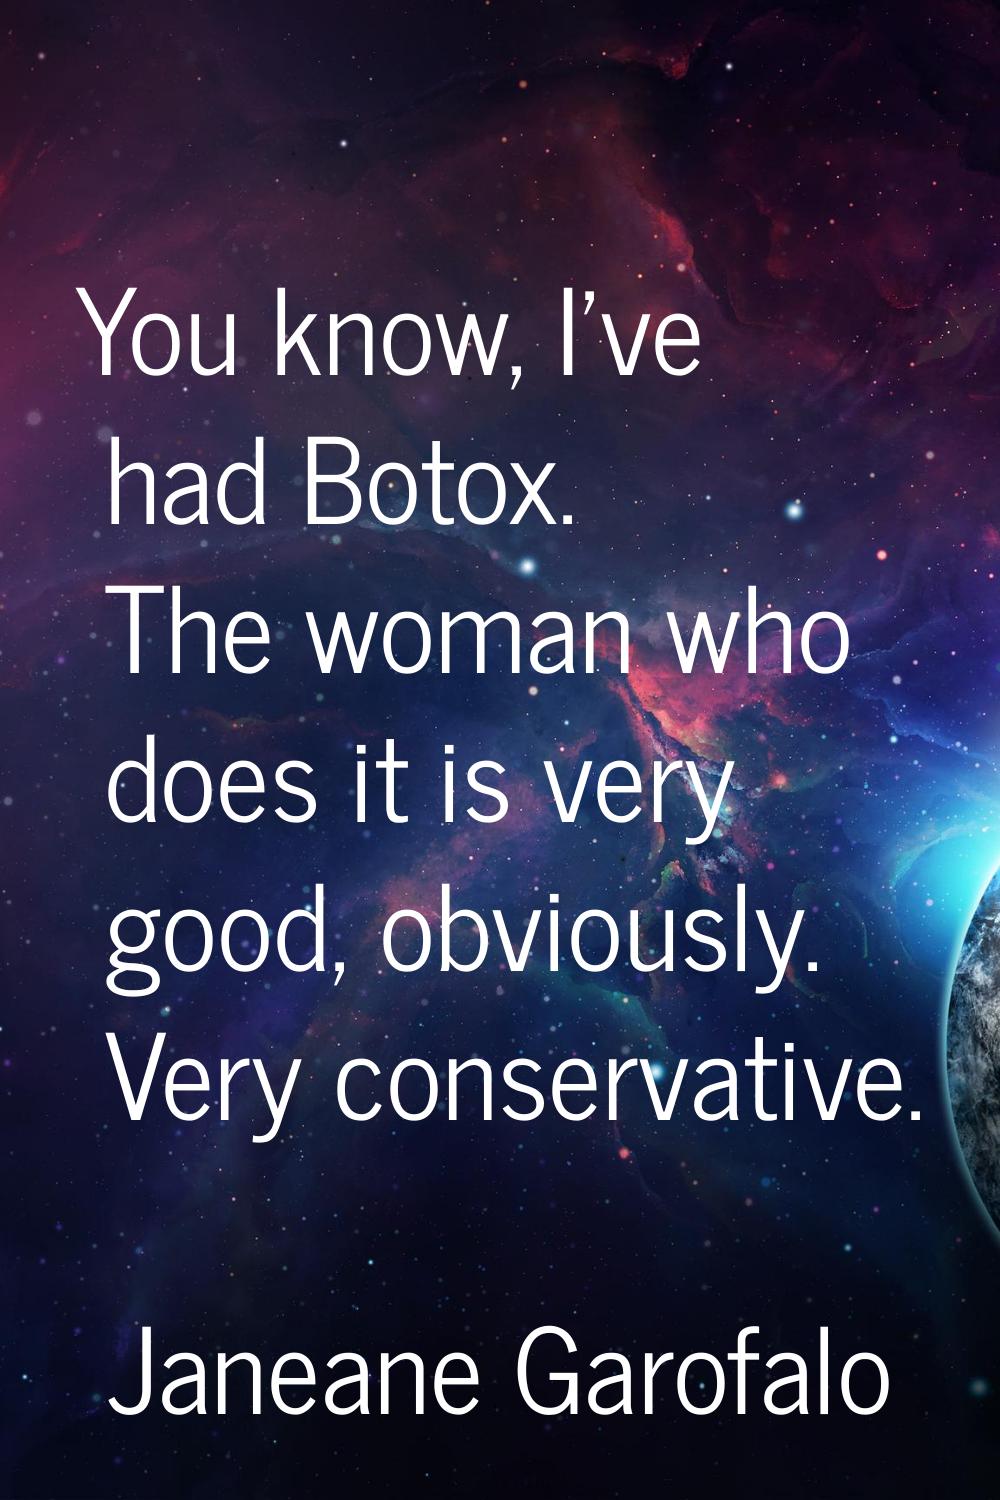 You know, I've had Botox. The woman who does it is very good, obviously. Very conservative.